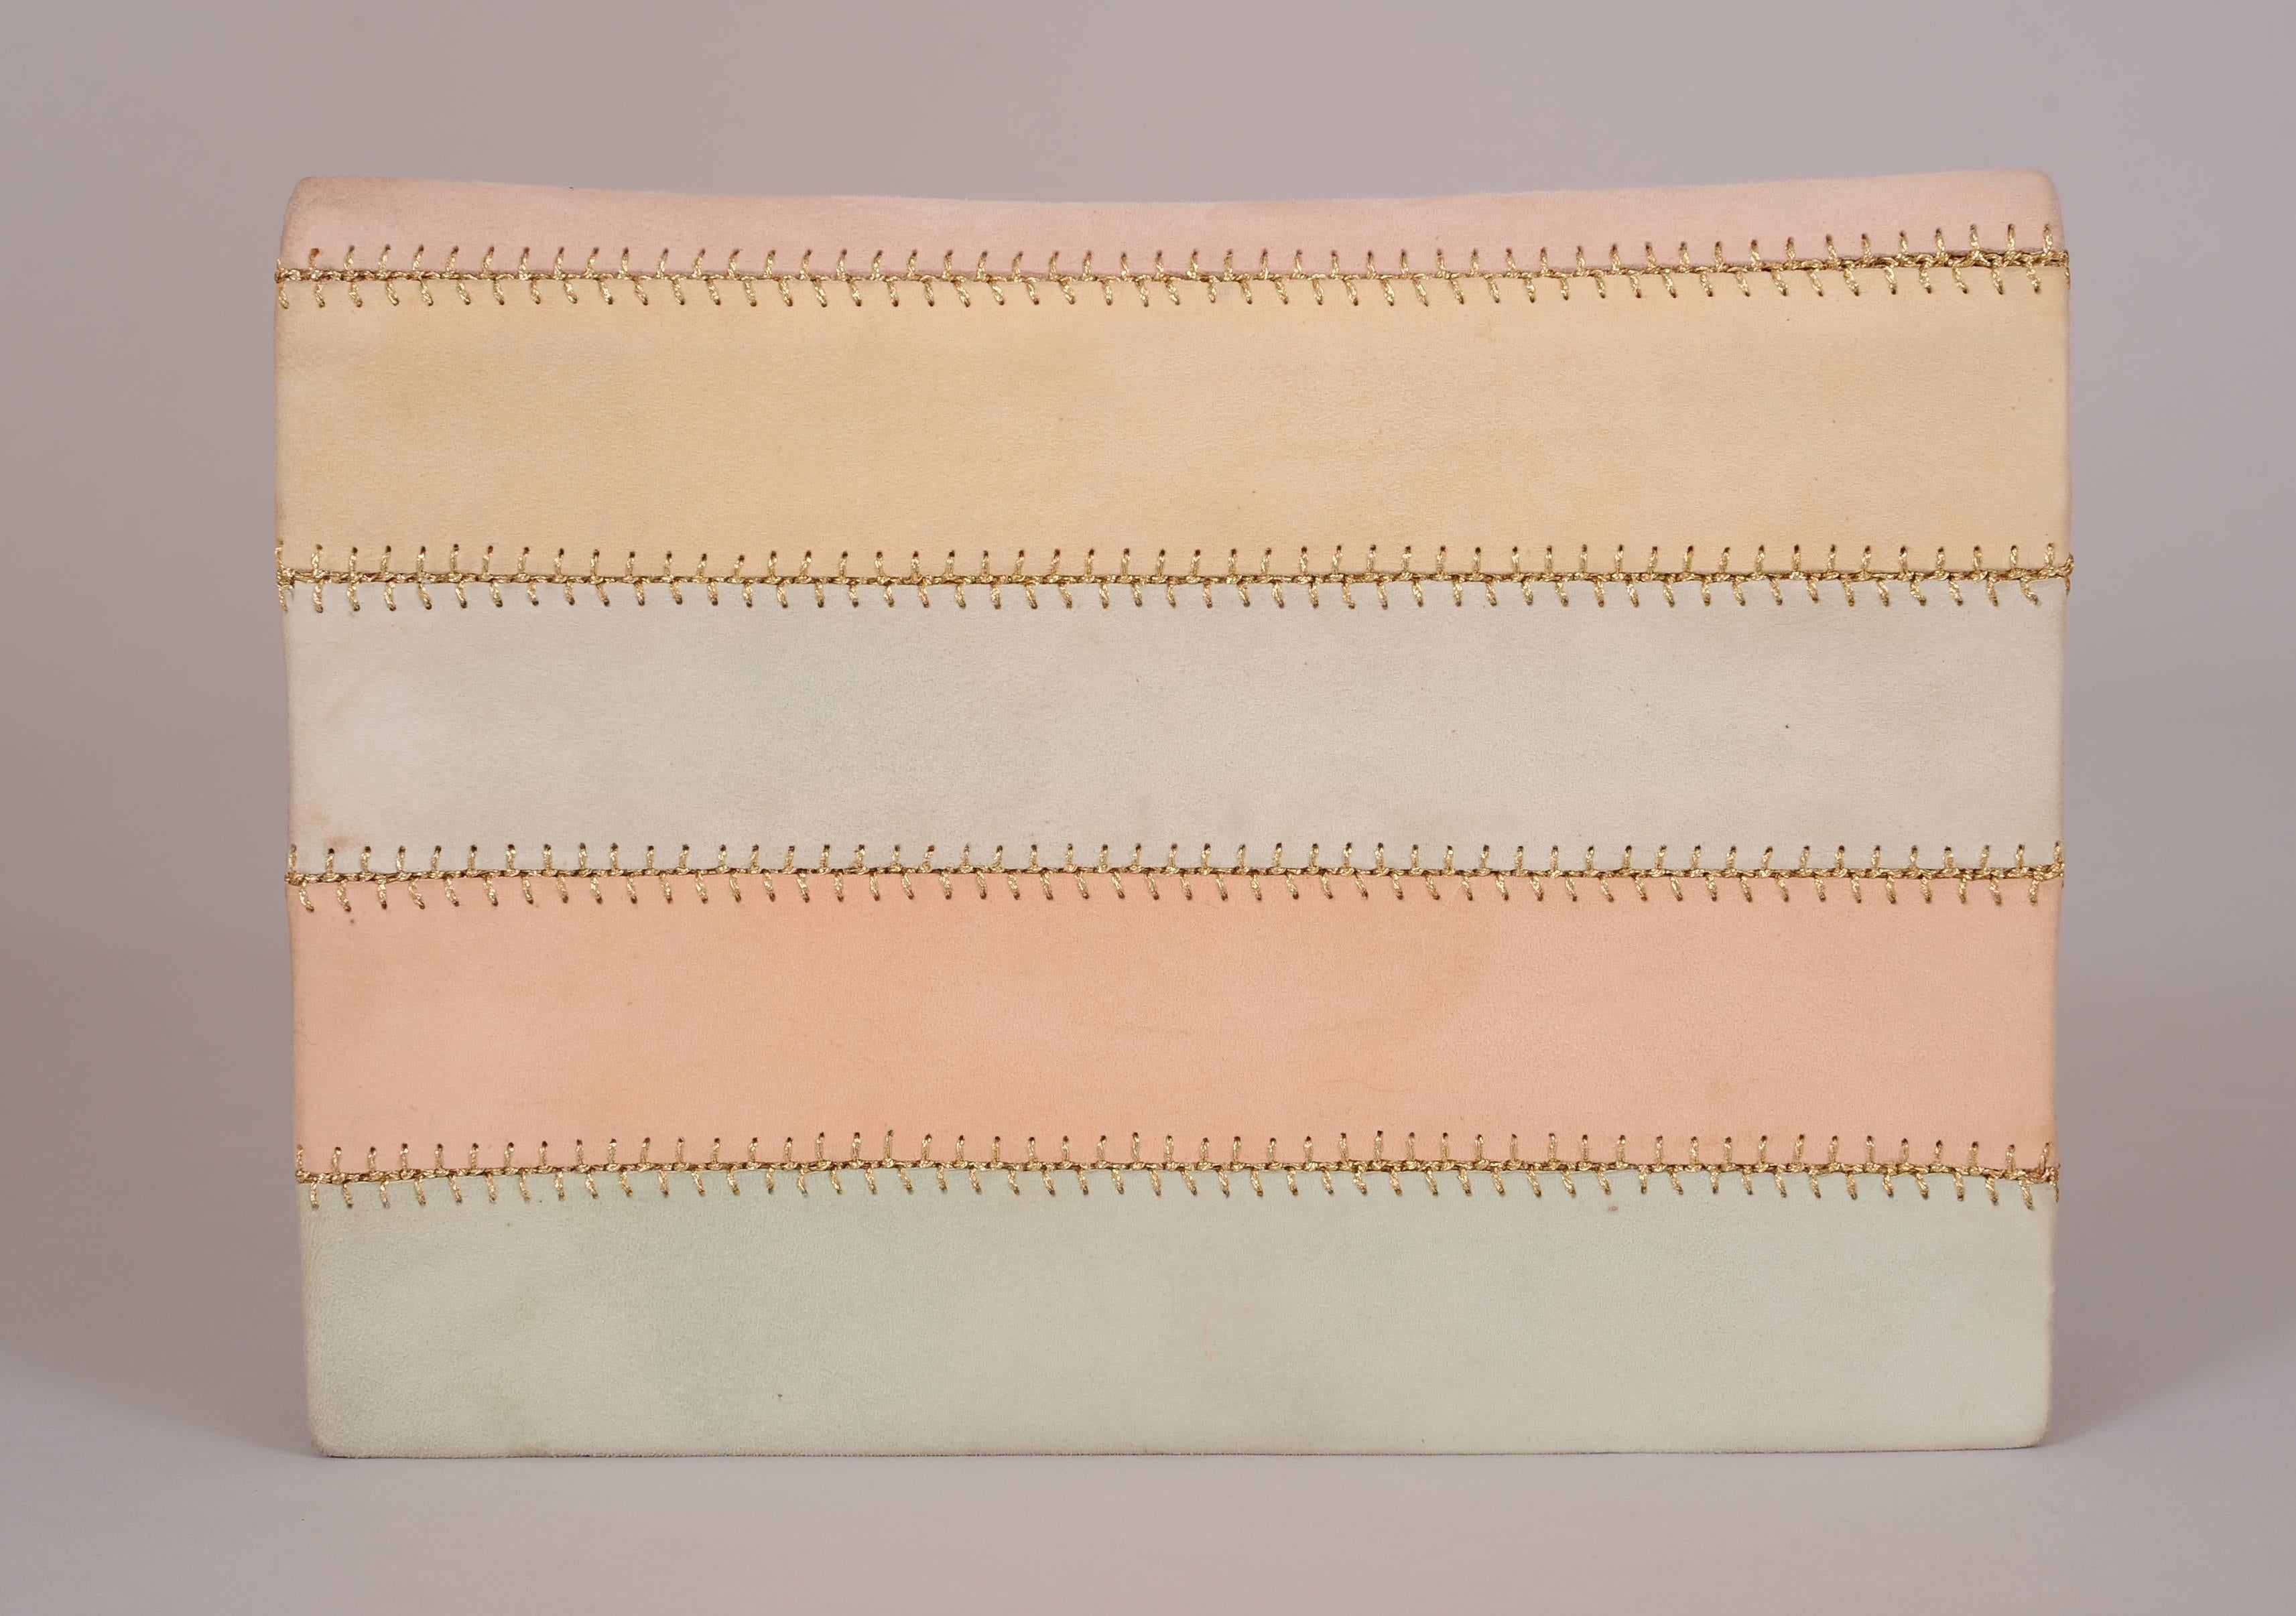 Andrea Pfister has designed a pale sorbet pink suede clutch with a rainbow of pastel colors on the front. These panels are joined with decorative metallic gold lacing. The bag has a slip pocket on the back, an optional pink suede shoulder strap, and